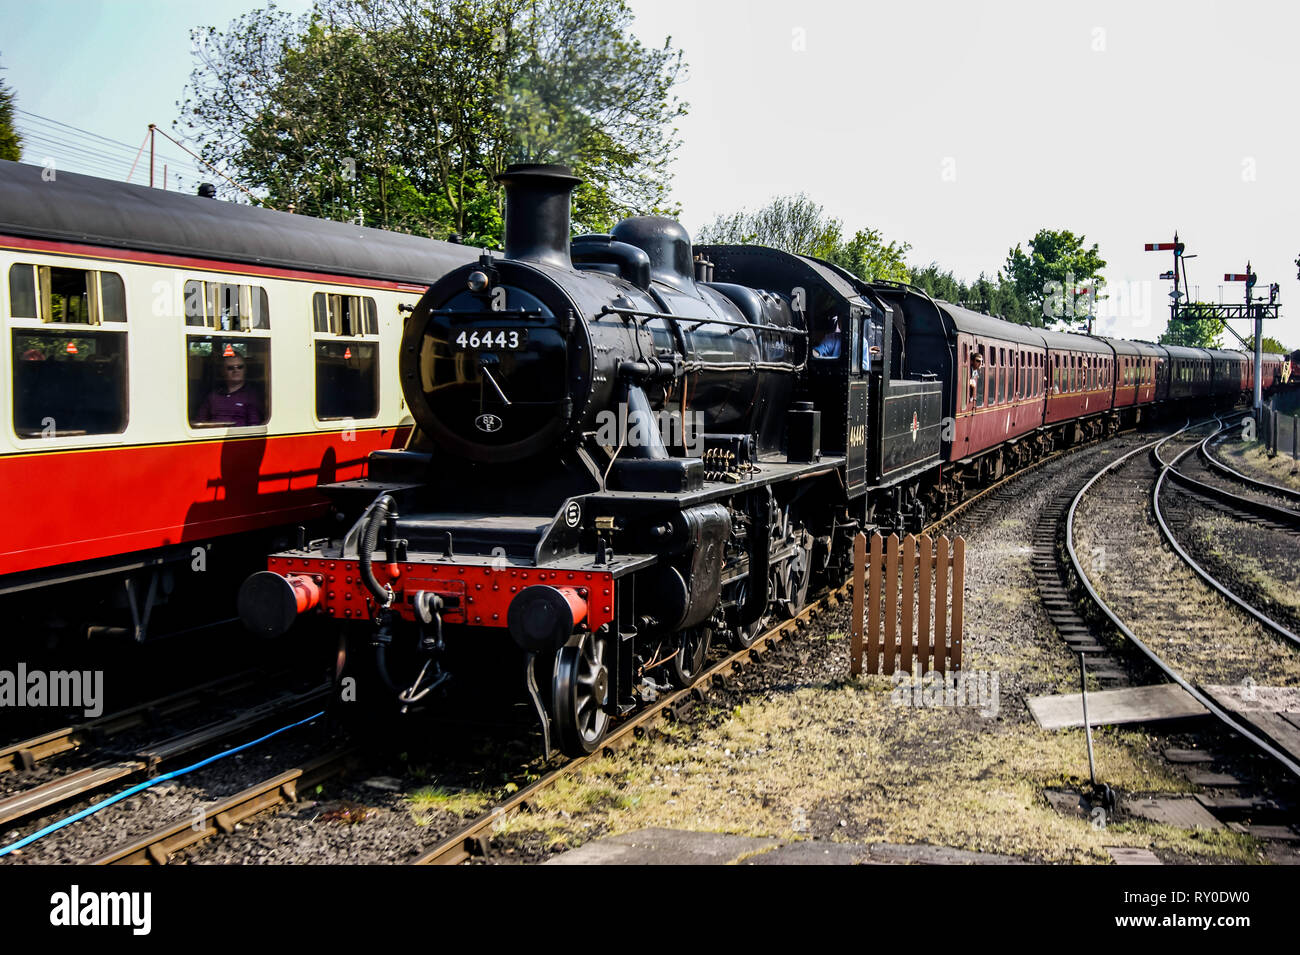 2MT 2-6-0 no 46443 arriving at Bridgnorth Station on the Severn valley Railway Stock Photo